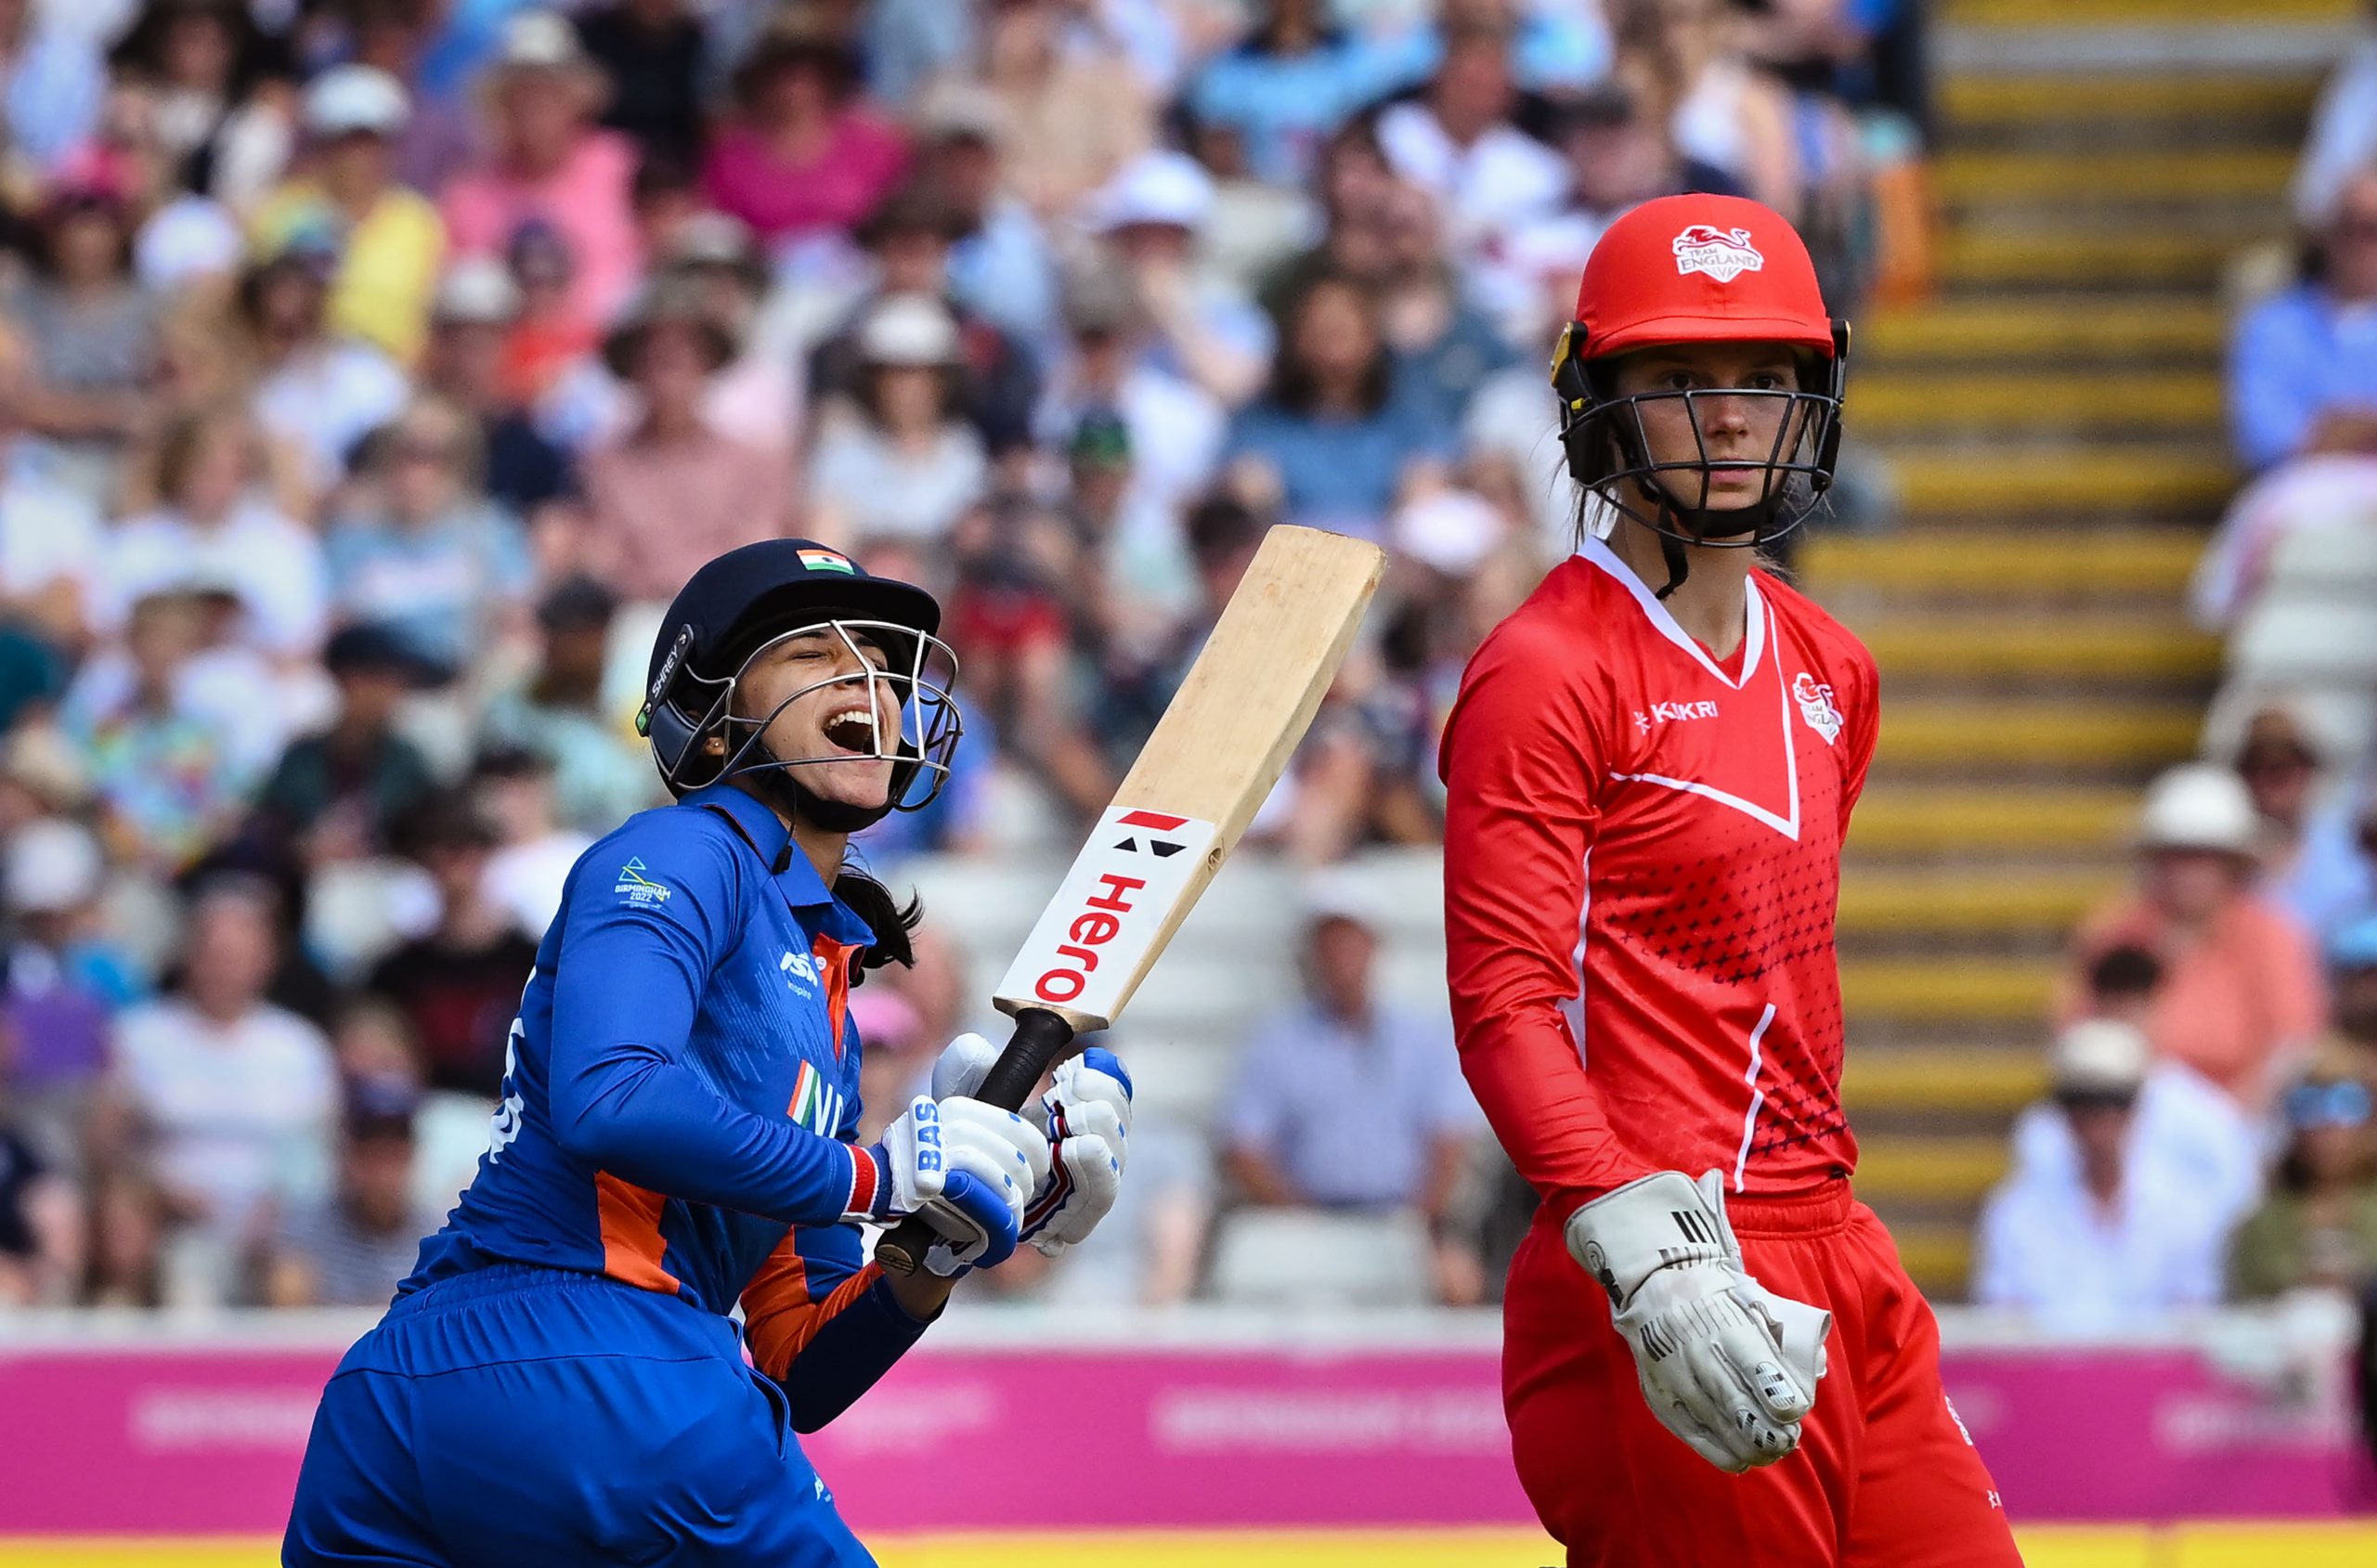 CWG 2022: India beat England by 4 runs, advance to gold medal match